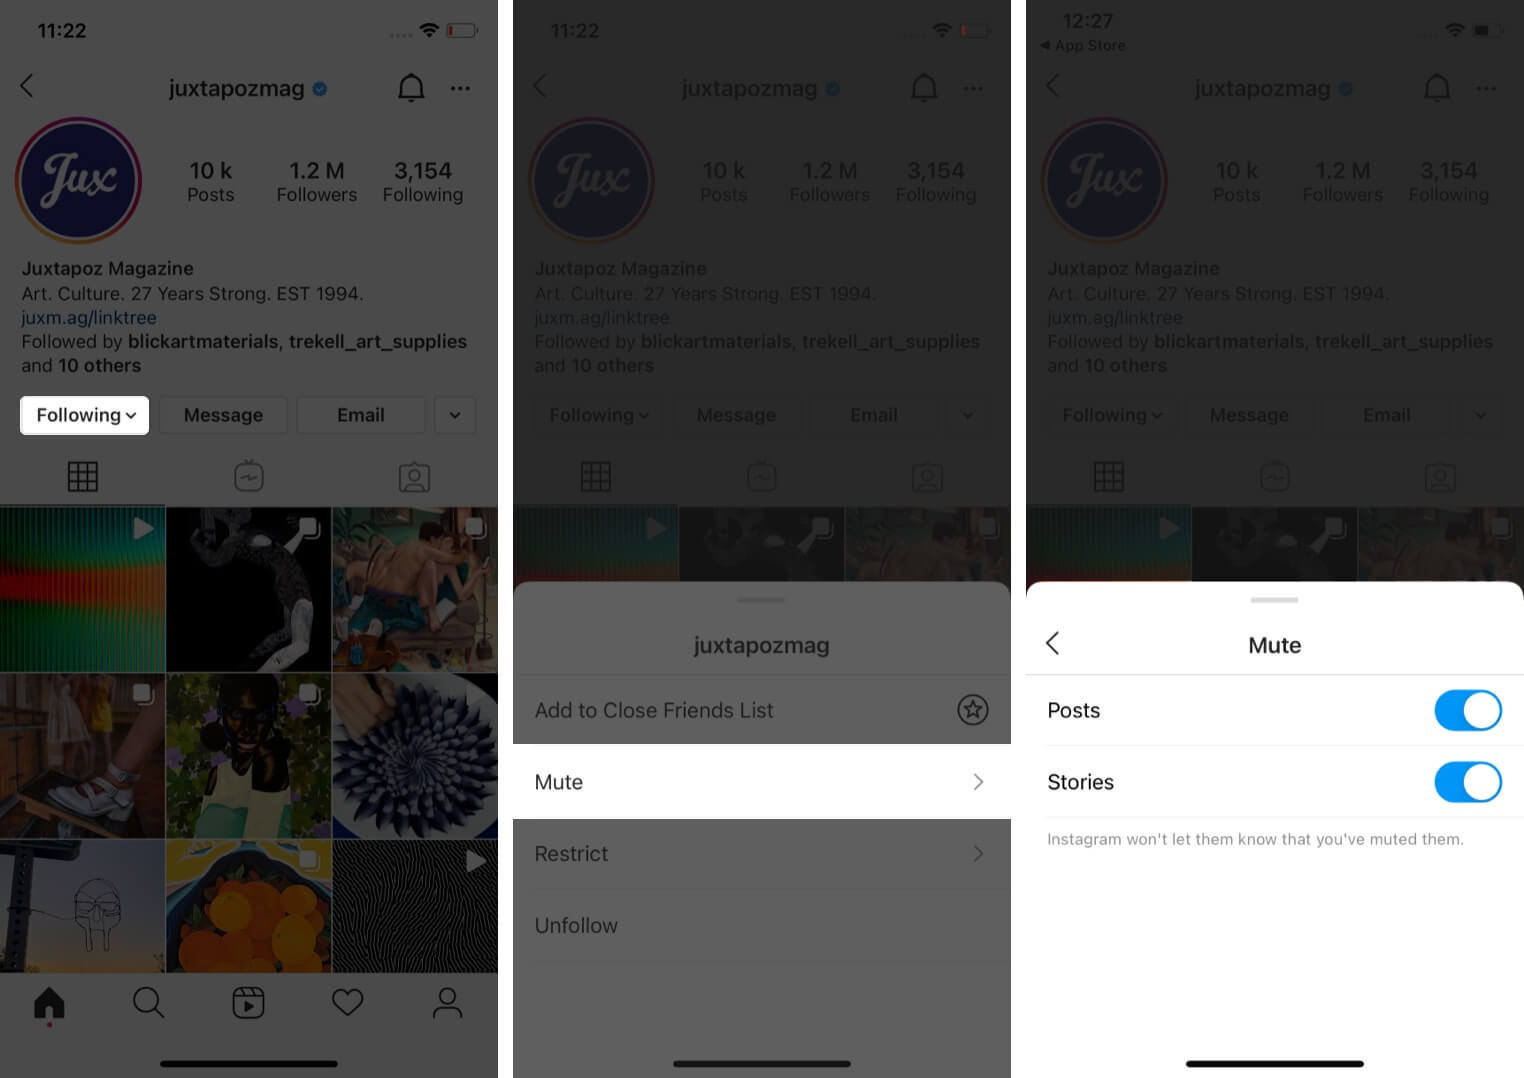 Mute an Instagram account from their profile on iPhone